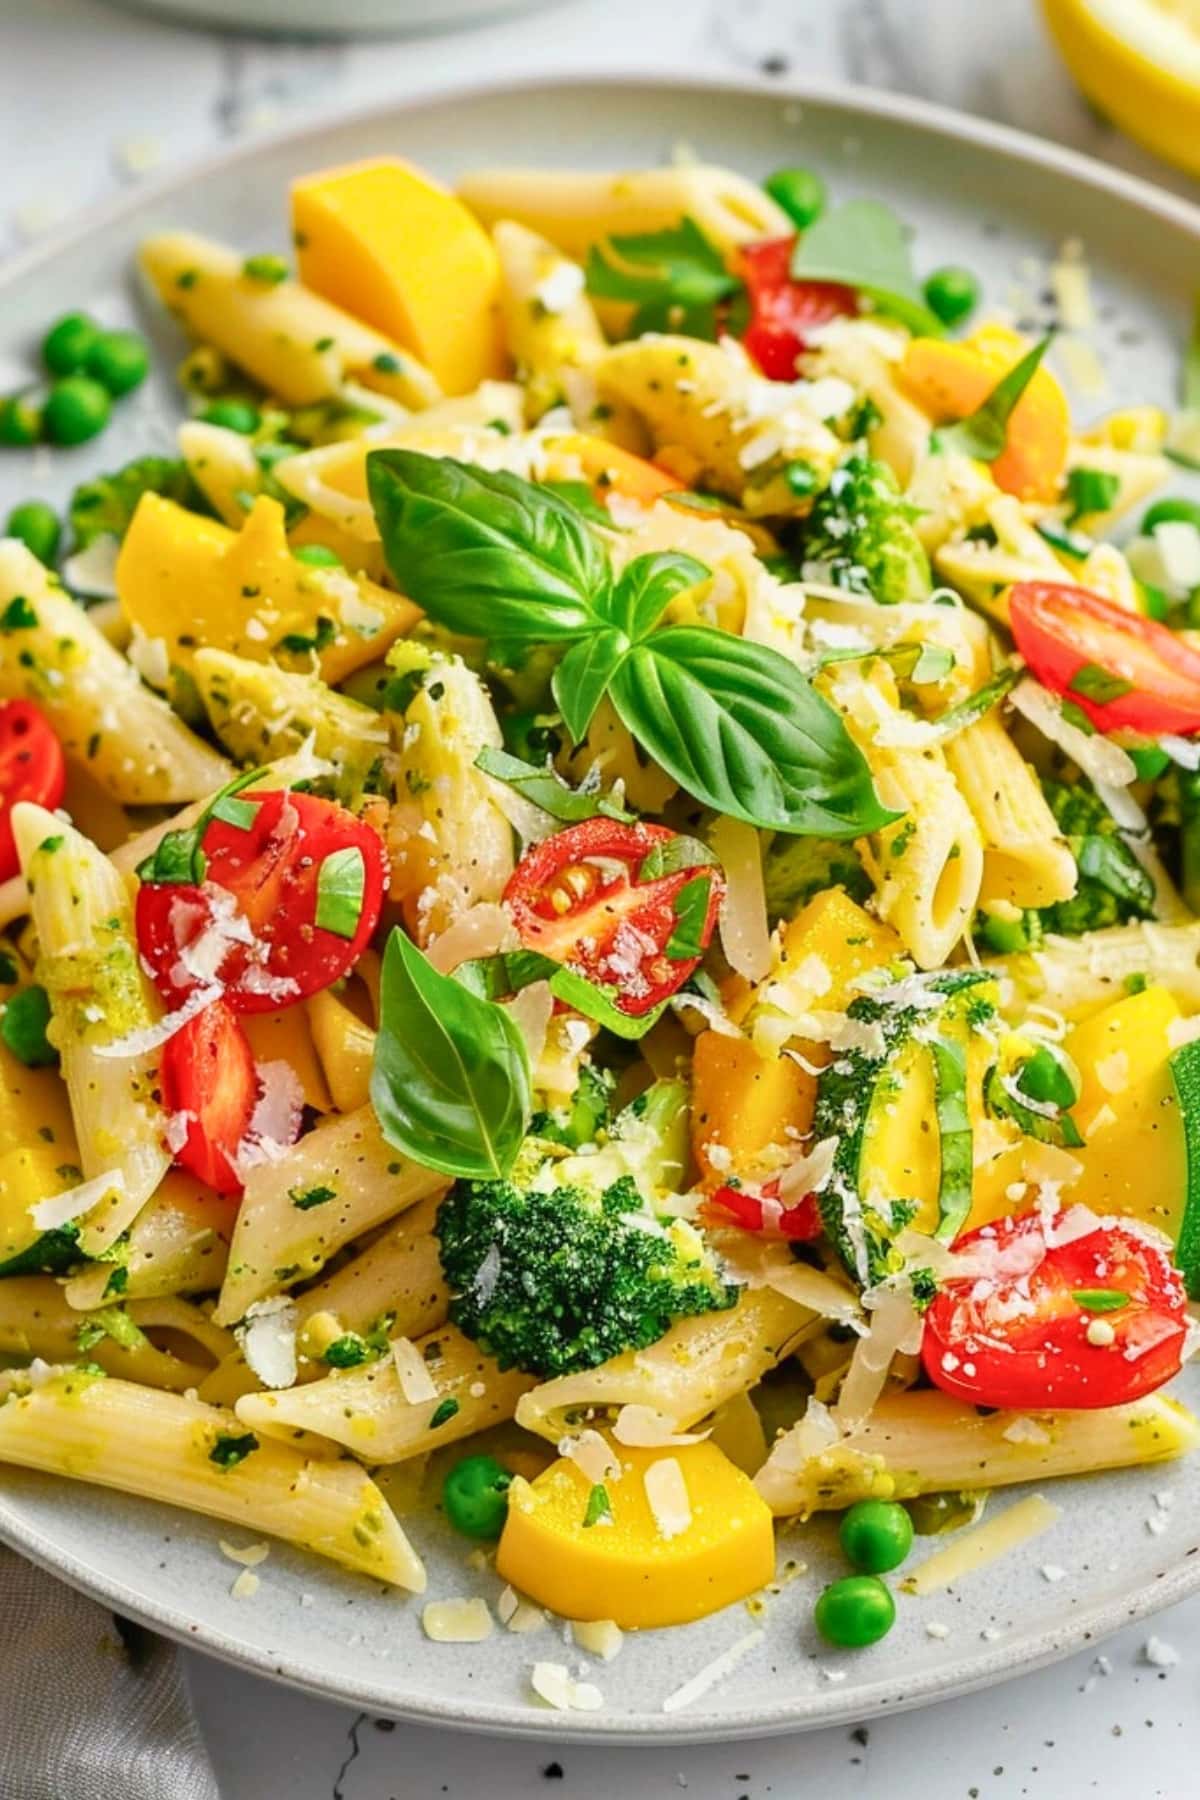 Penne pasta with Red bell pepper, Zucchini, Yellow squash, Broccoli florets, Cherry tomatoes, Frozen peas served on plate.